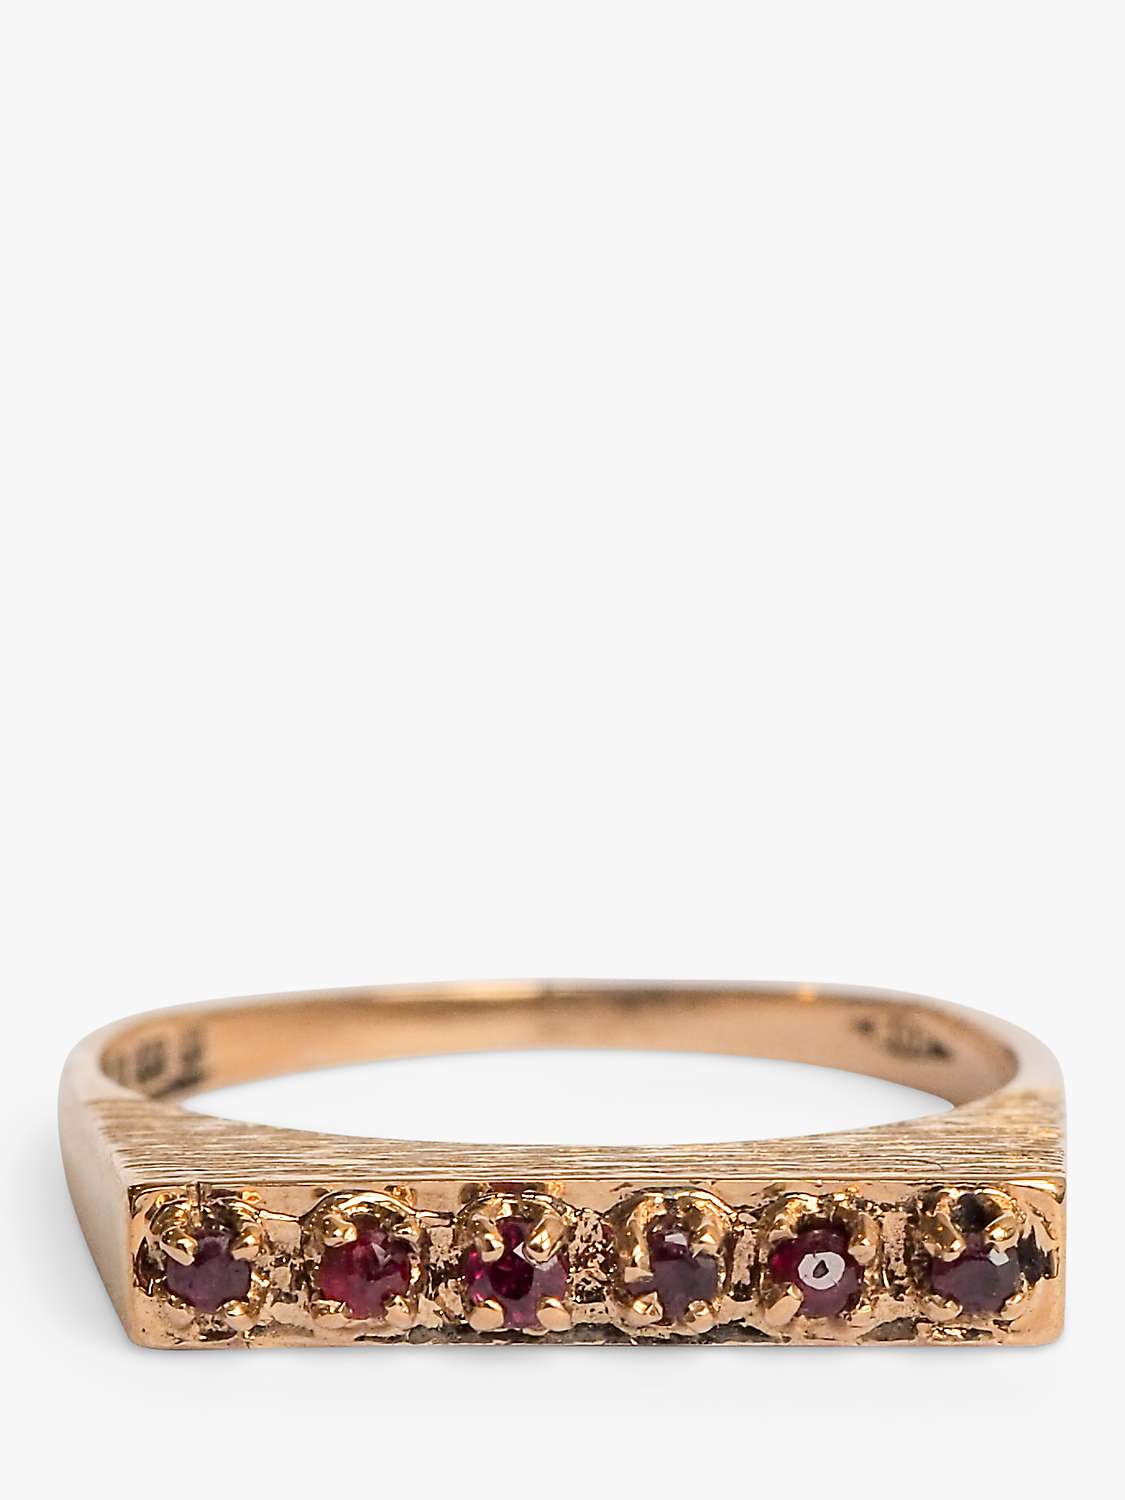 Buy L & T Heirlooms Second Hand 9ct Yellow Gold Ruby Bar Ring, Dated Circa 1980 Online at johnlewis.com